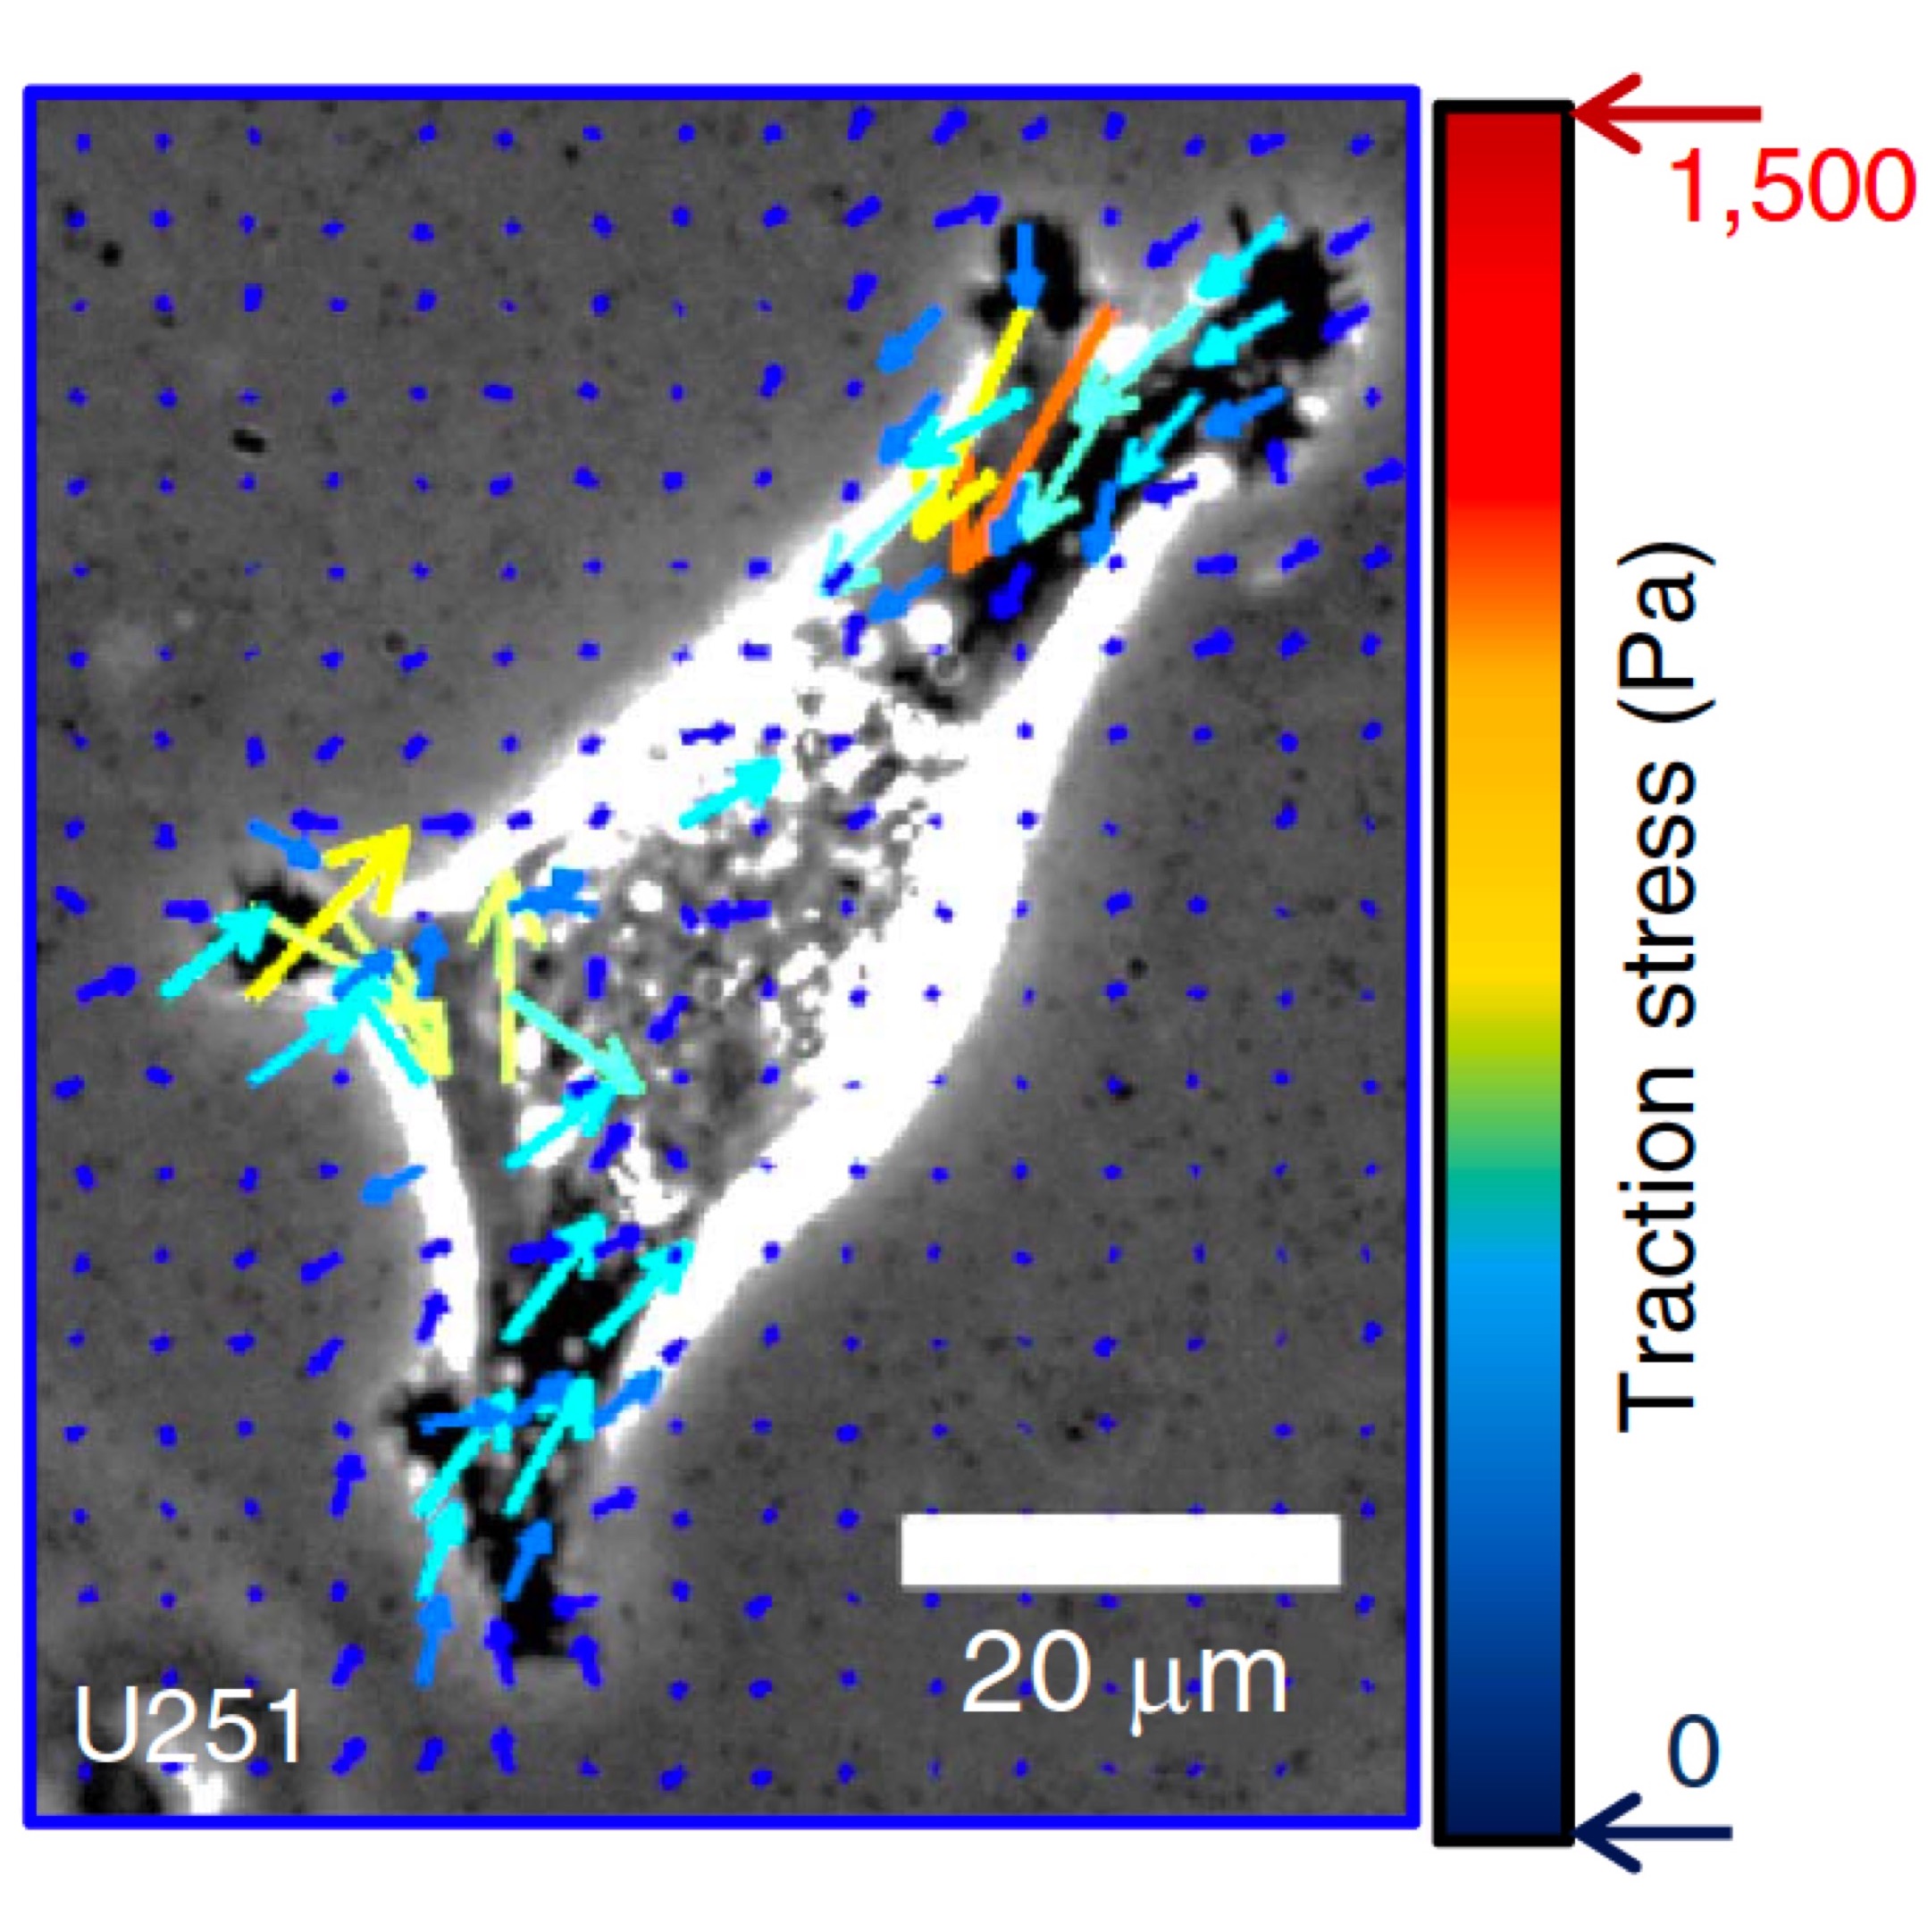 Image at the cellular level using imaging technology. Shows cluster with various colored arrows indicating the level of traction stress (Pa) from 0 to 1,500; more stress shown at the edges. Shown at a scale of 20 um. U251.